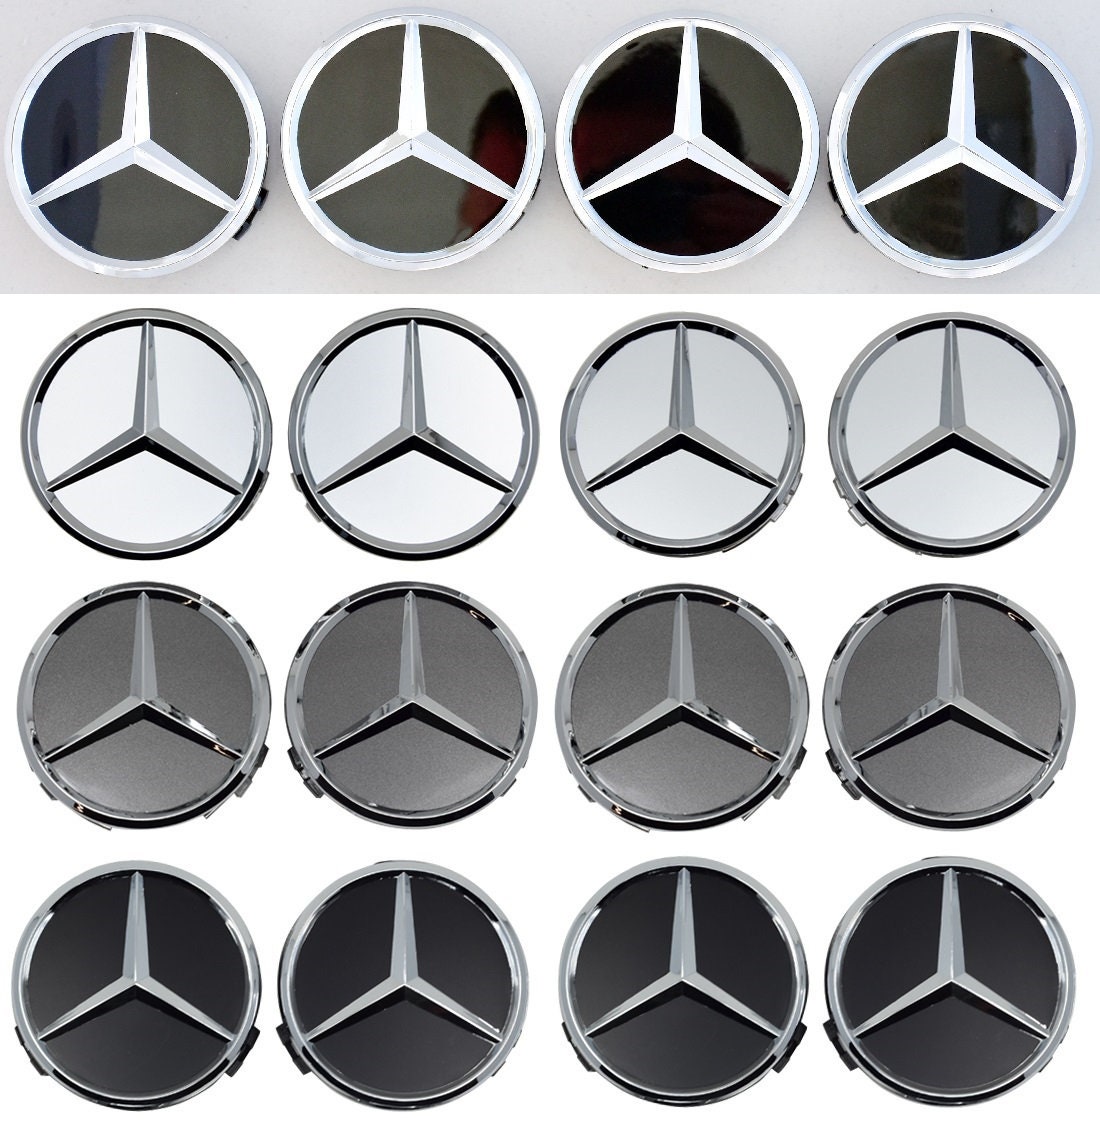 Hassy Toelating Oefenen Mercedes Benz Accessories - Etsy